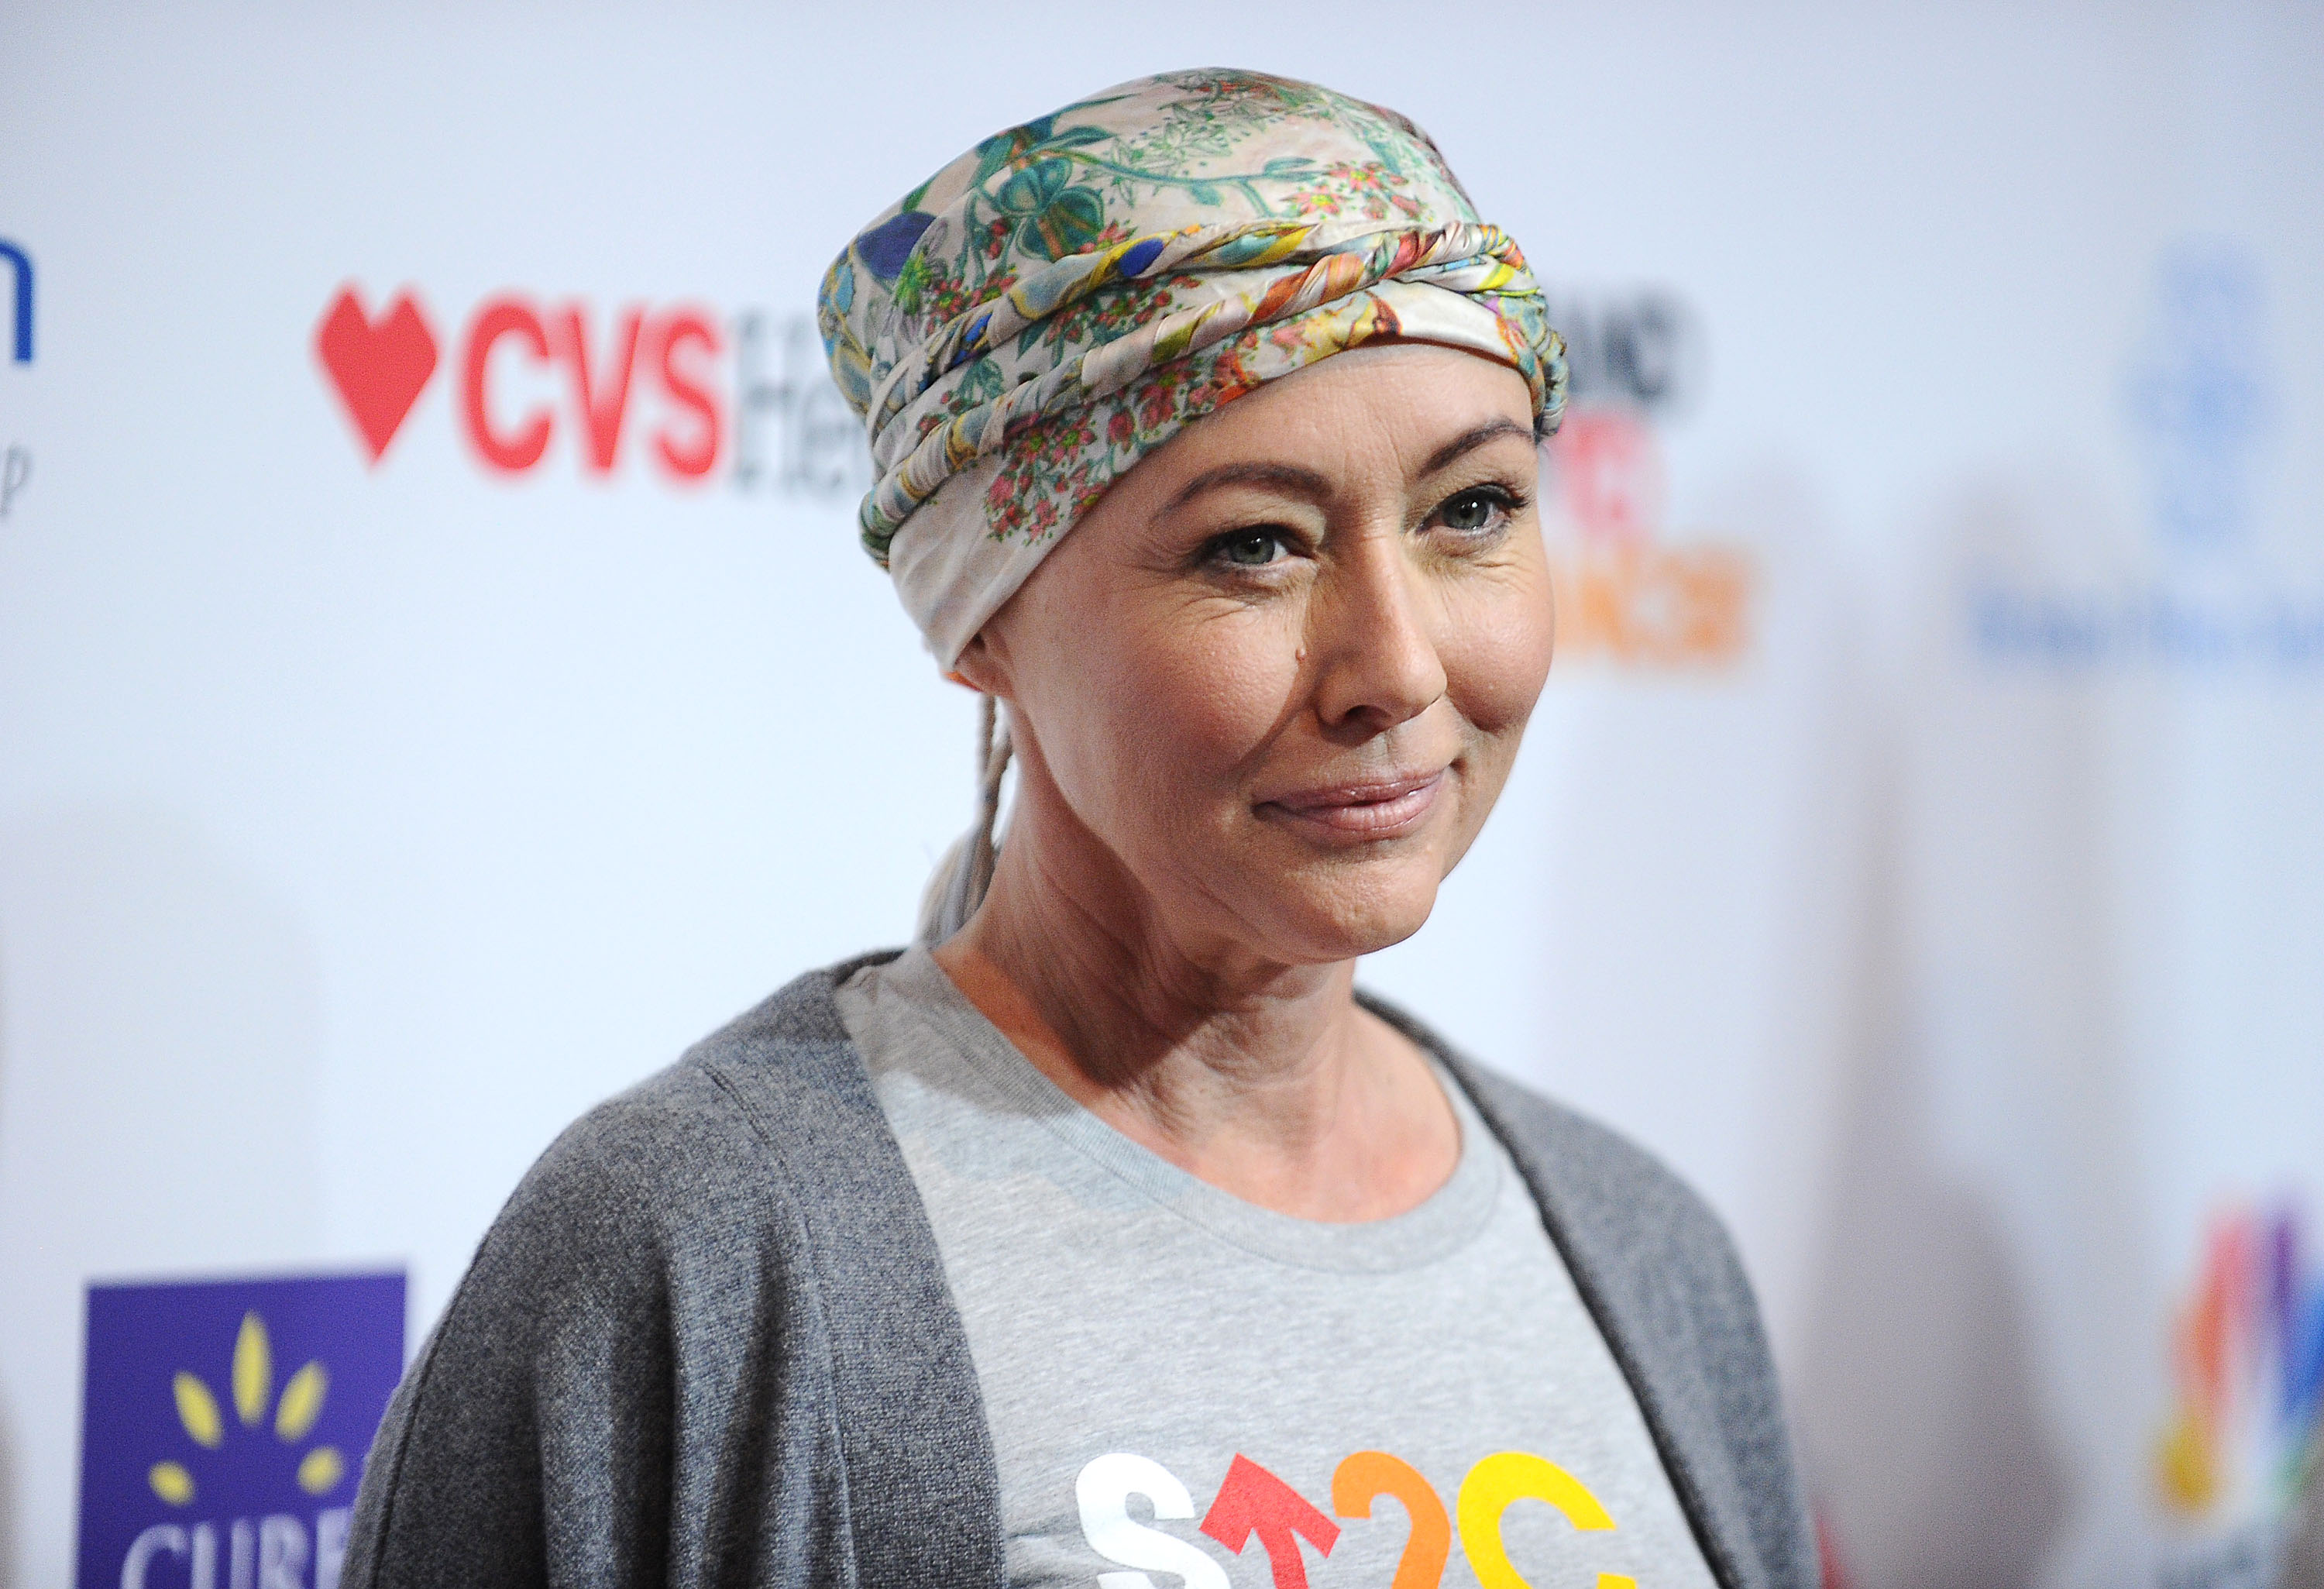 Shannen Doherty at the Stand Up to Cancer event in September 2016 in Los Angeles | Source: Getty Images